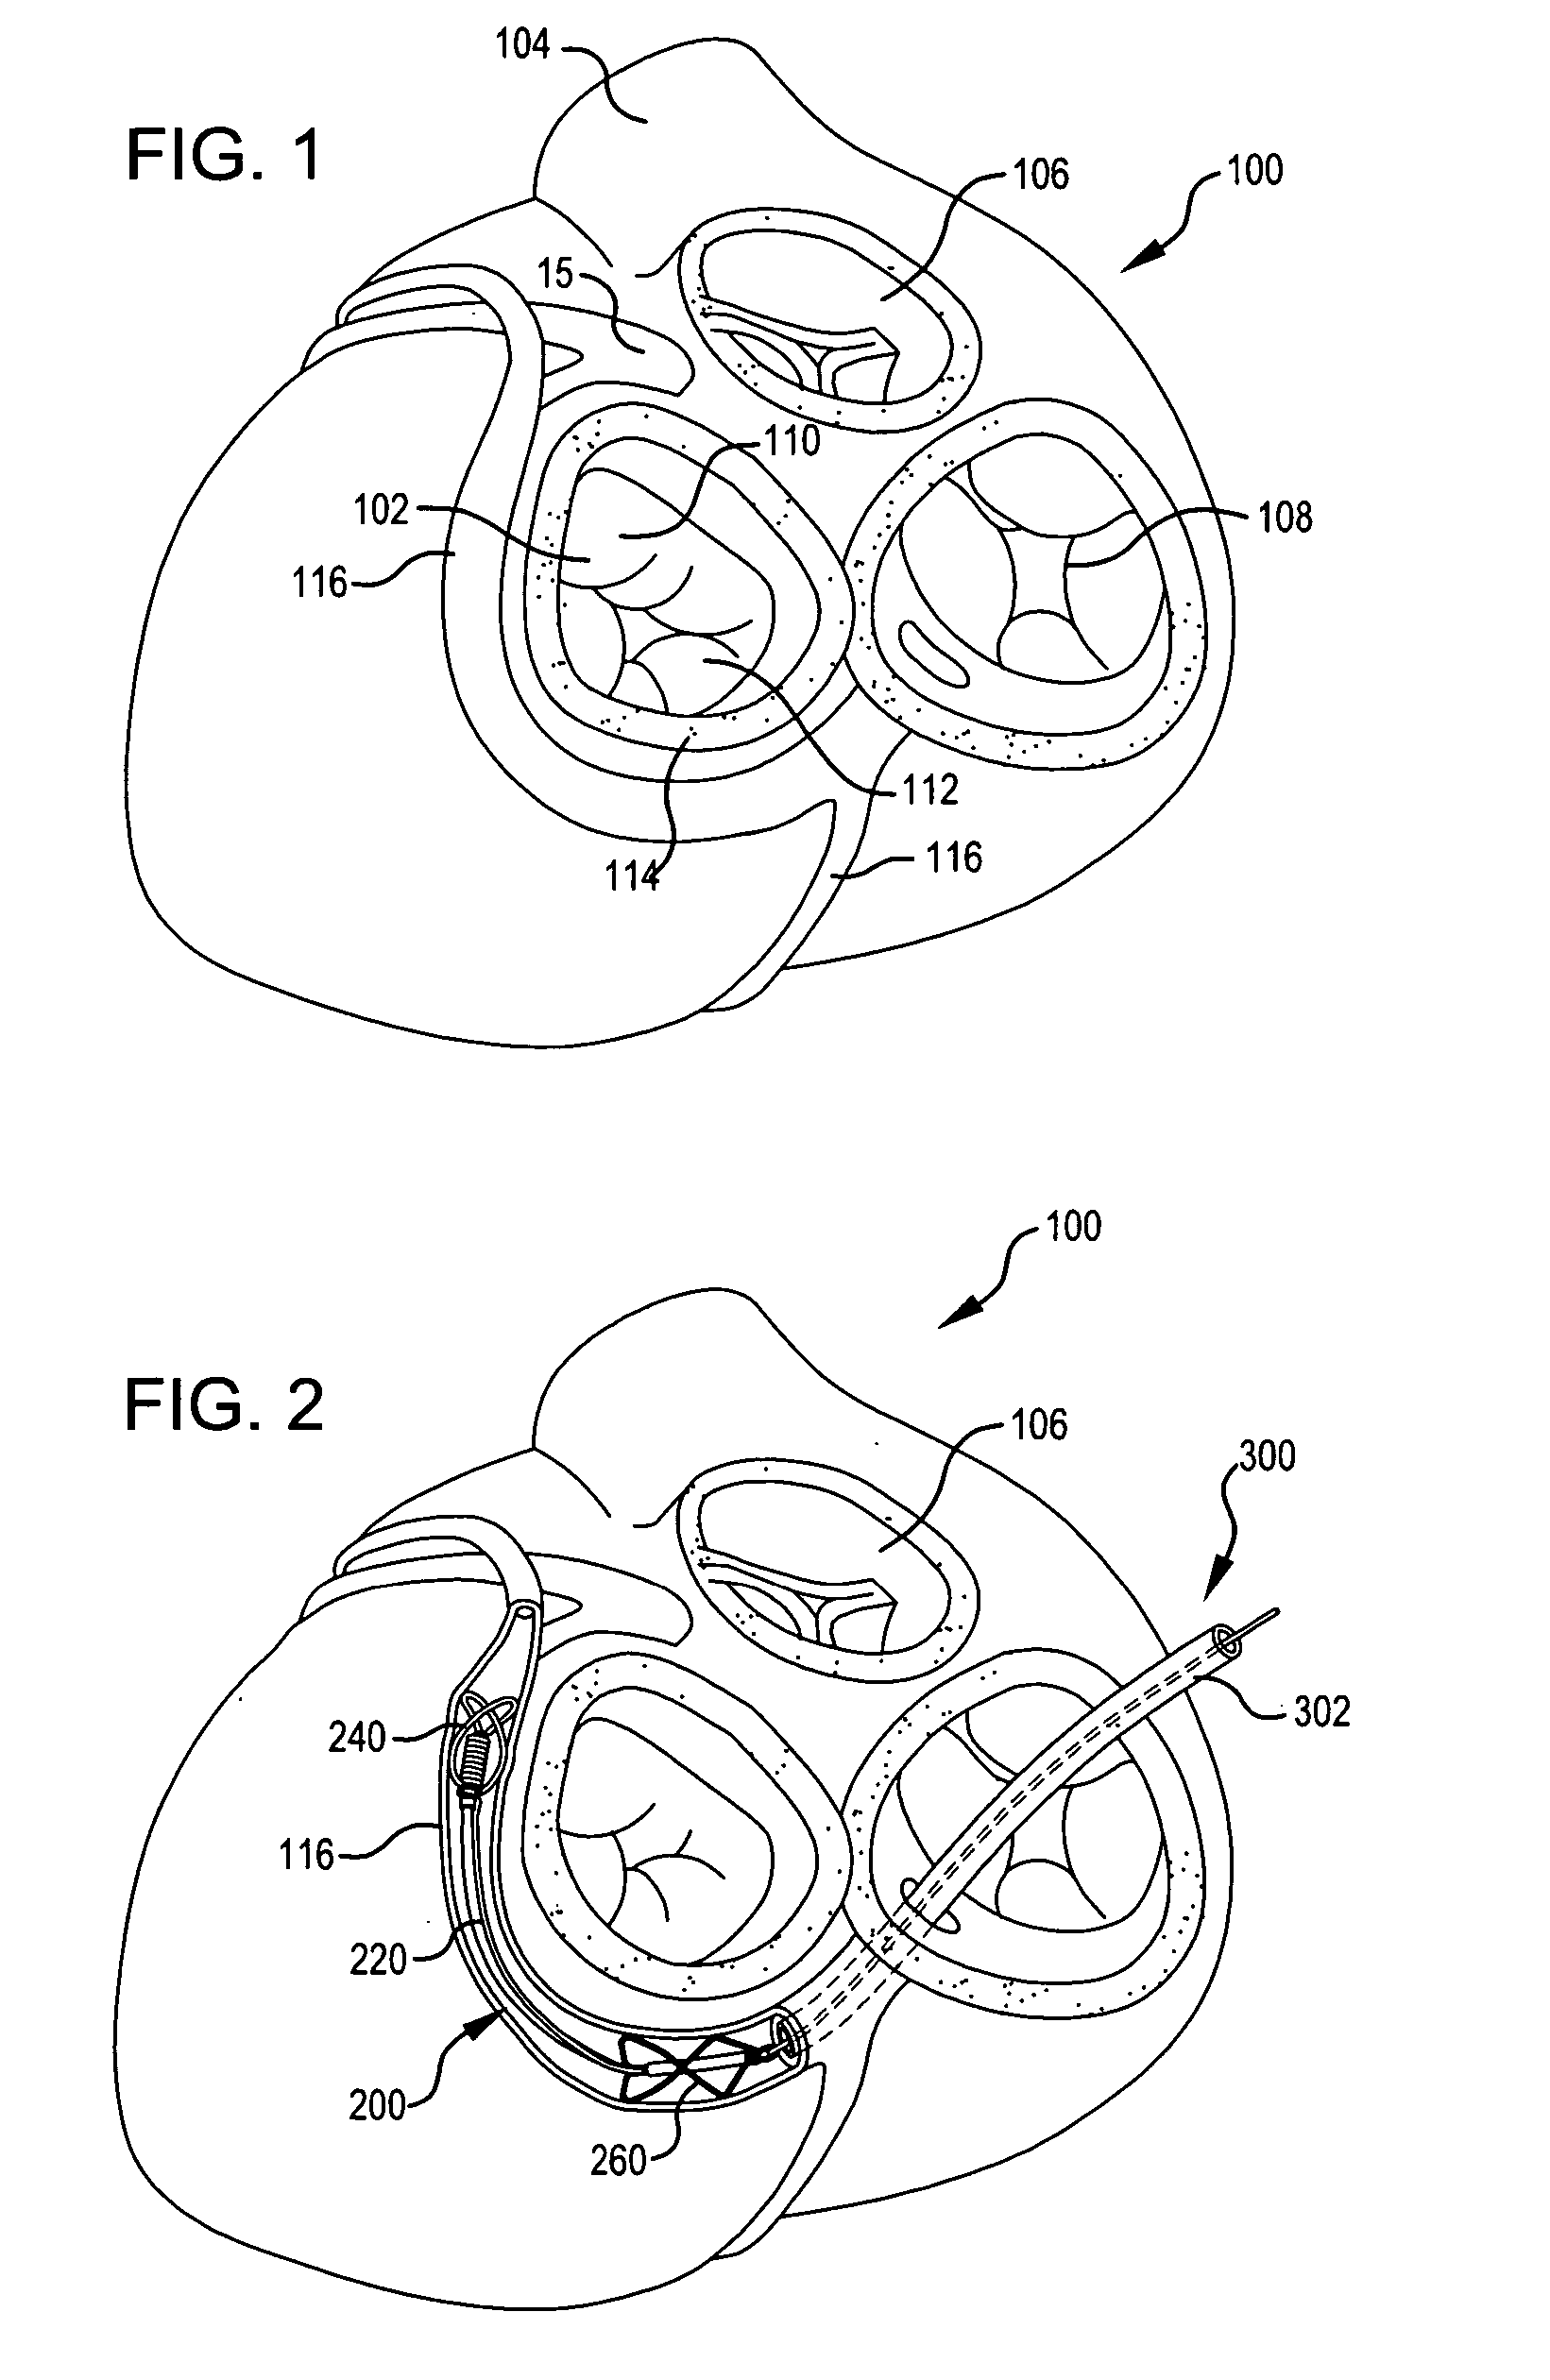 Body lumen shaping device with cardiac leads